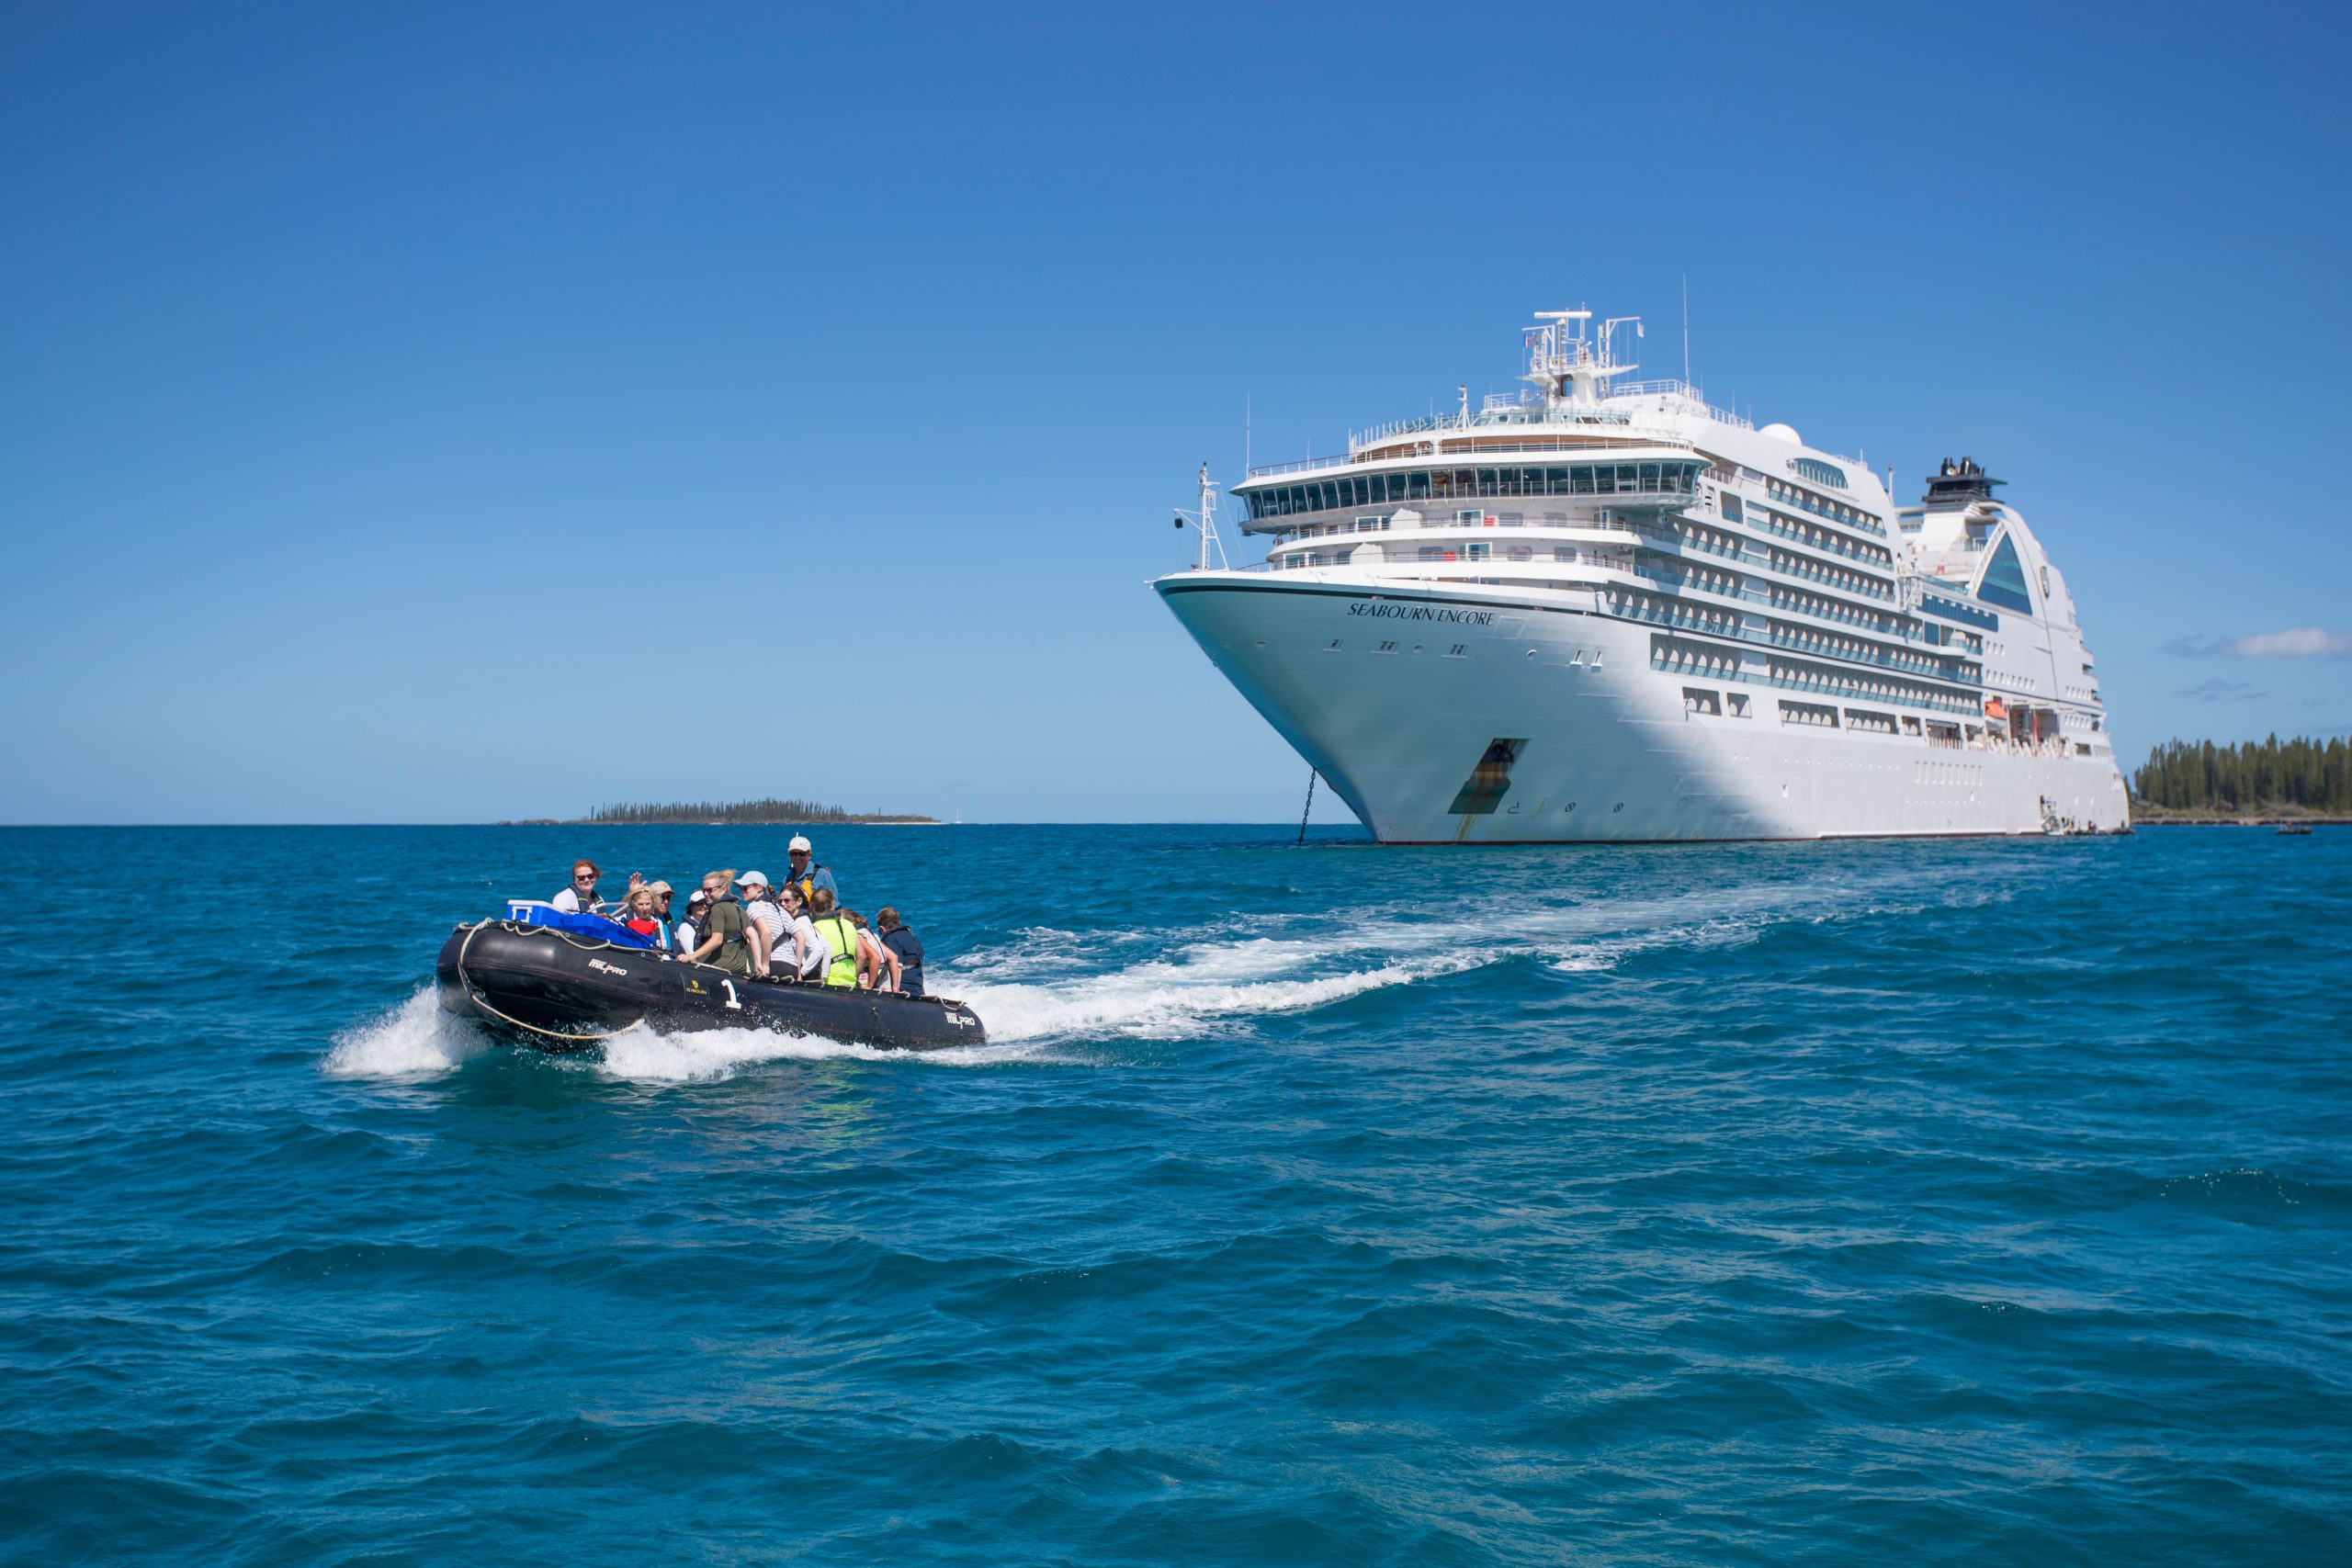 Seabourn Cruise Line – Enjoy Luxurious Suites, Exceptional Dining & Personalized Service on Seabourn